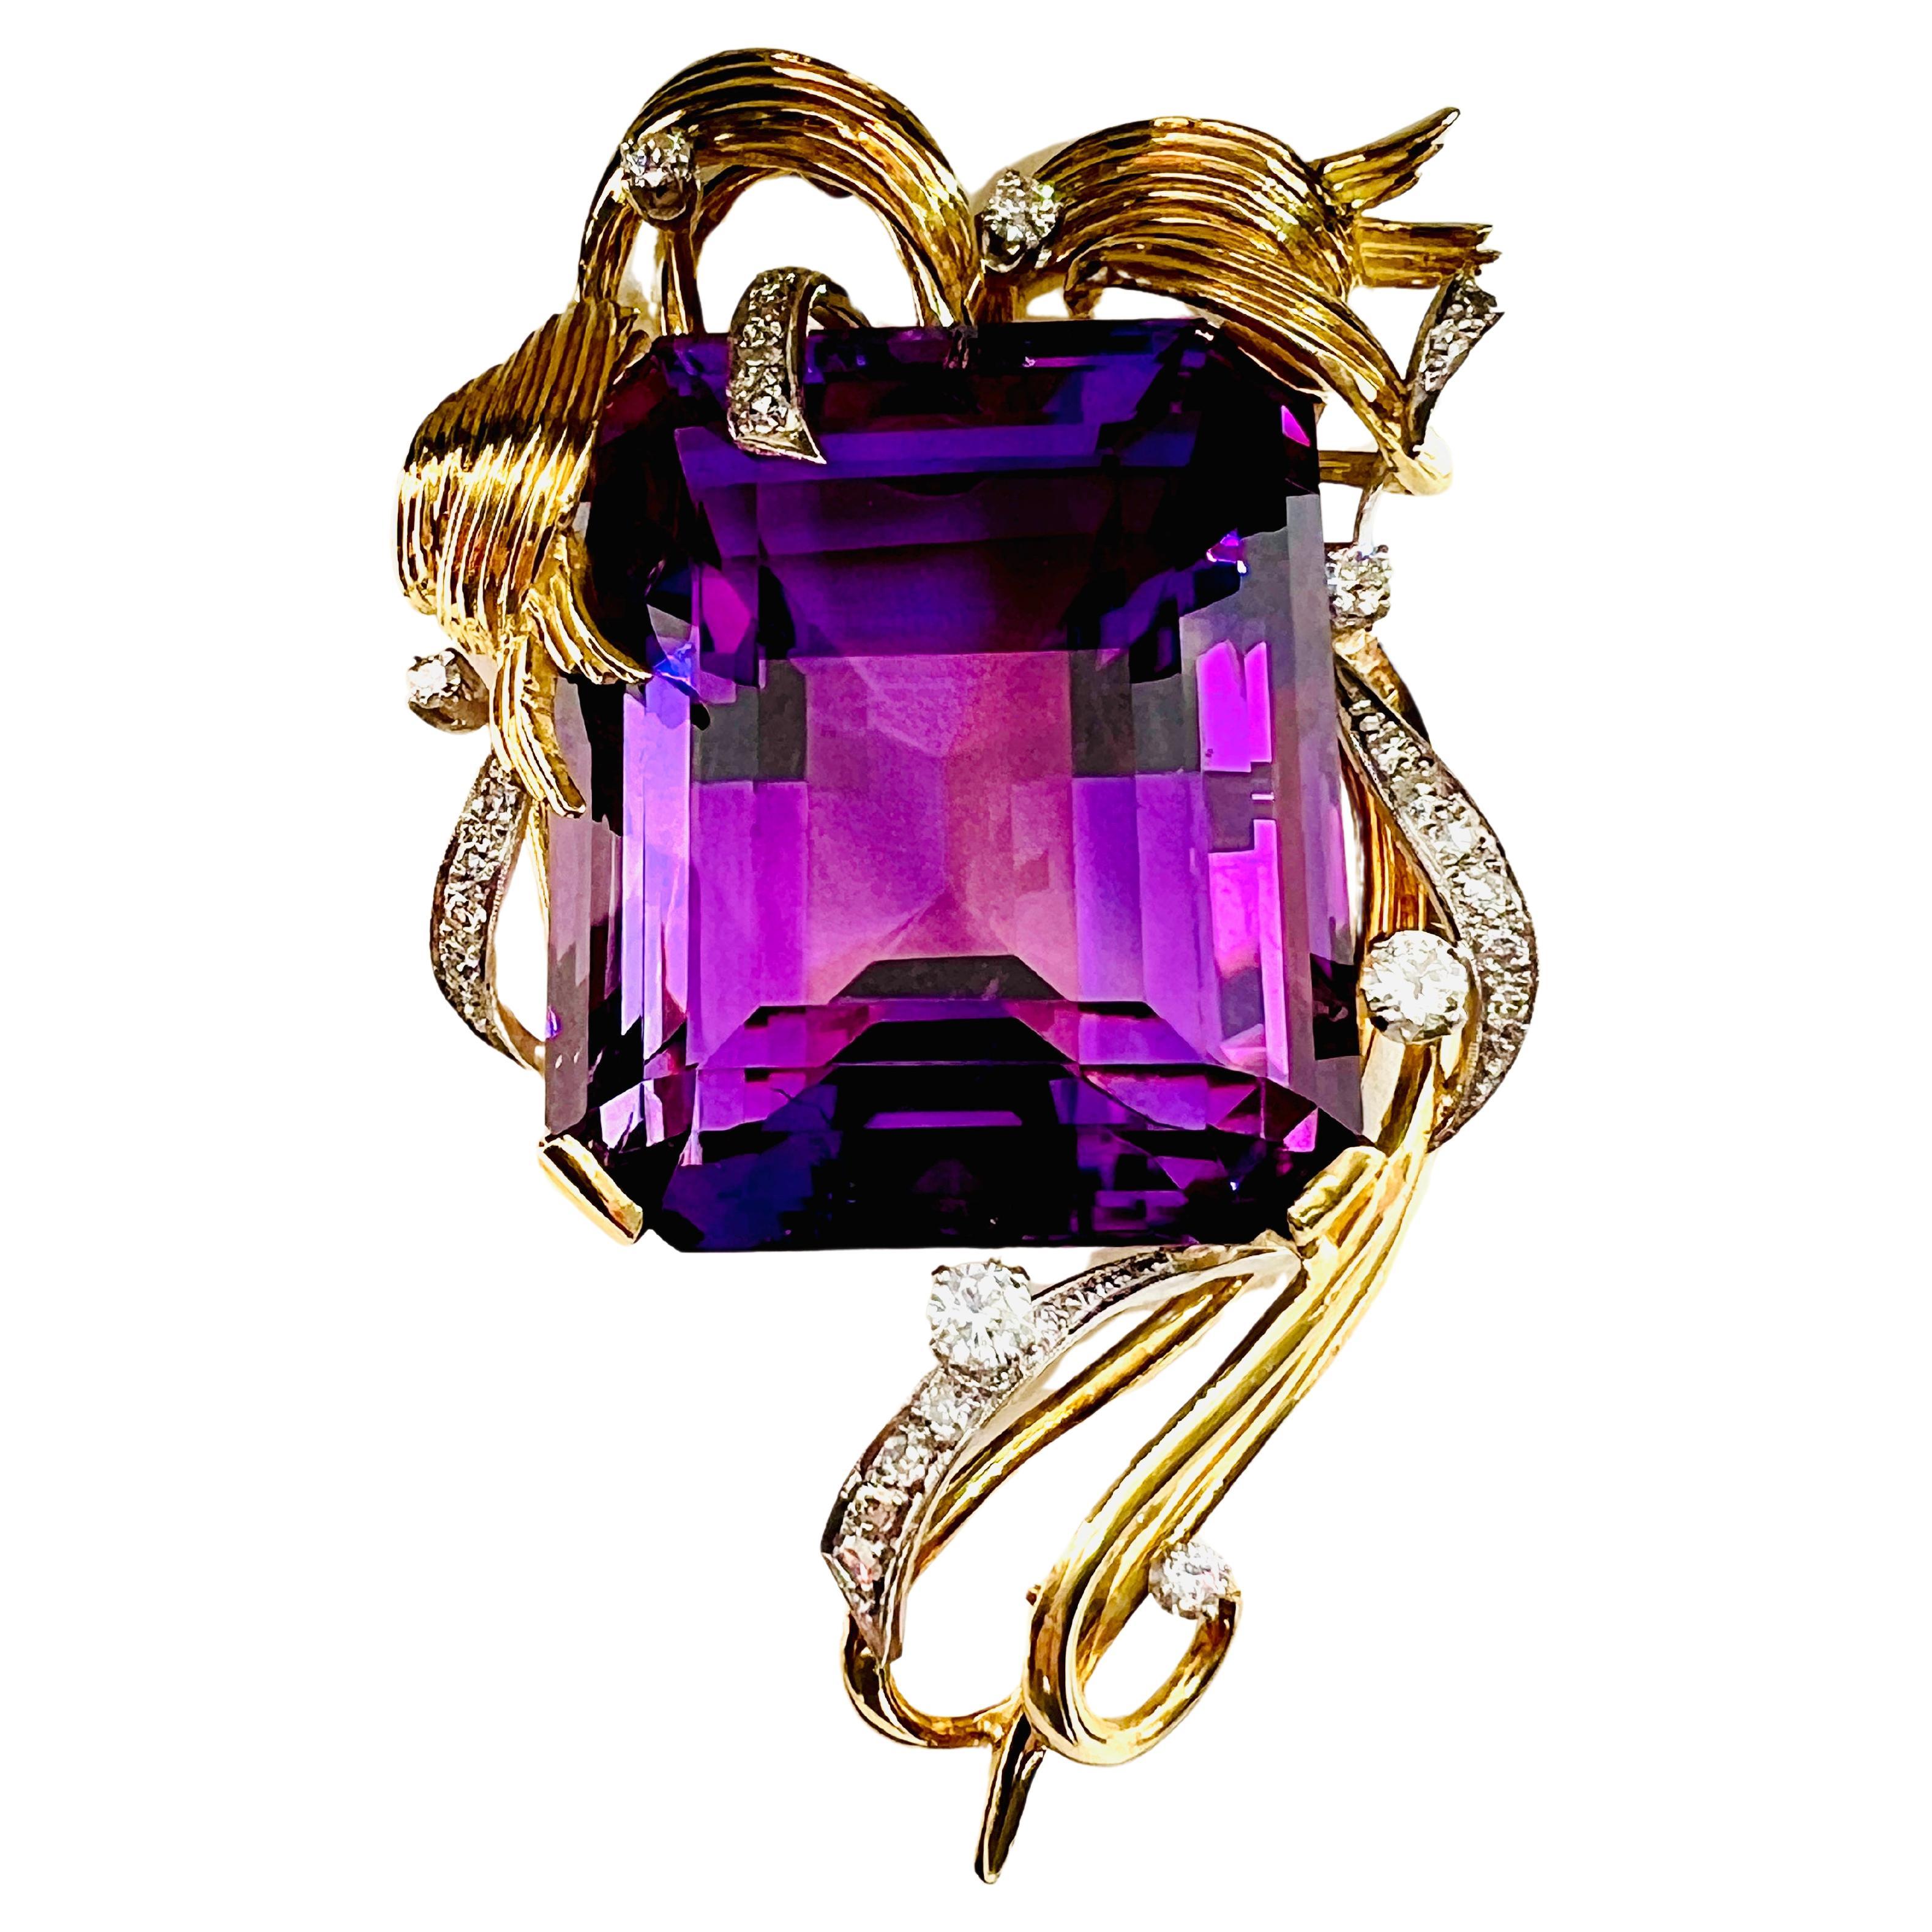 Vintage Hand Made 18K Yellow Gold Amethyst and Diamond Brooch